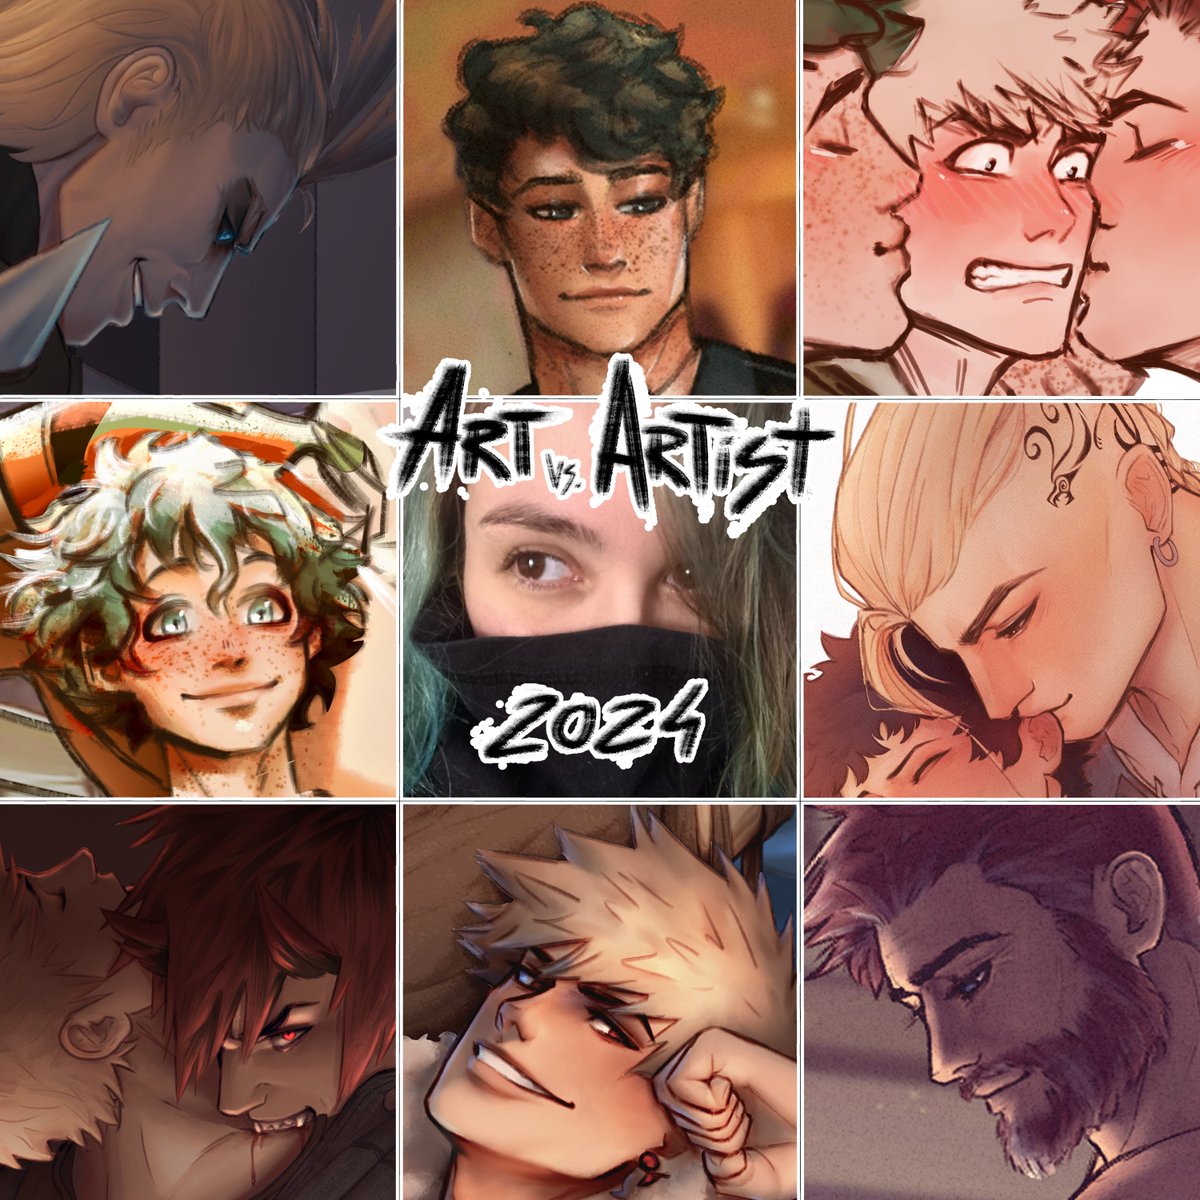 #artvsartist2023 i just realized i haven't done this for 2023 💀 smaller eyebags and longer hair!! still chaotic art style tho lol